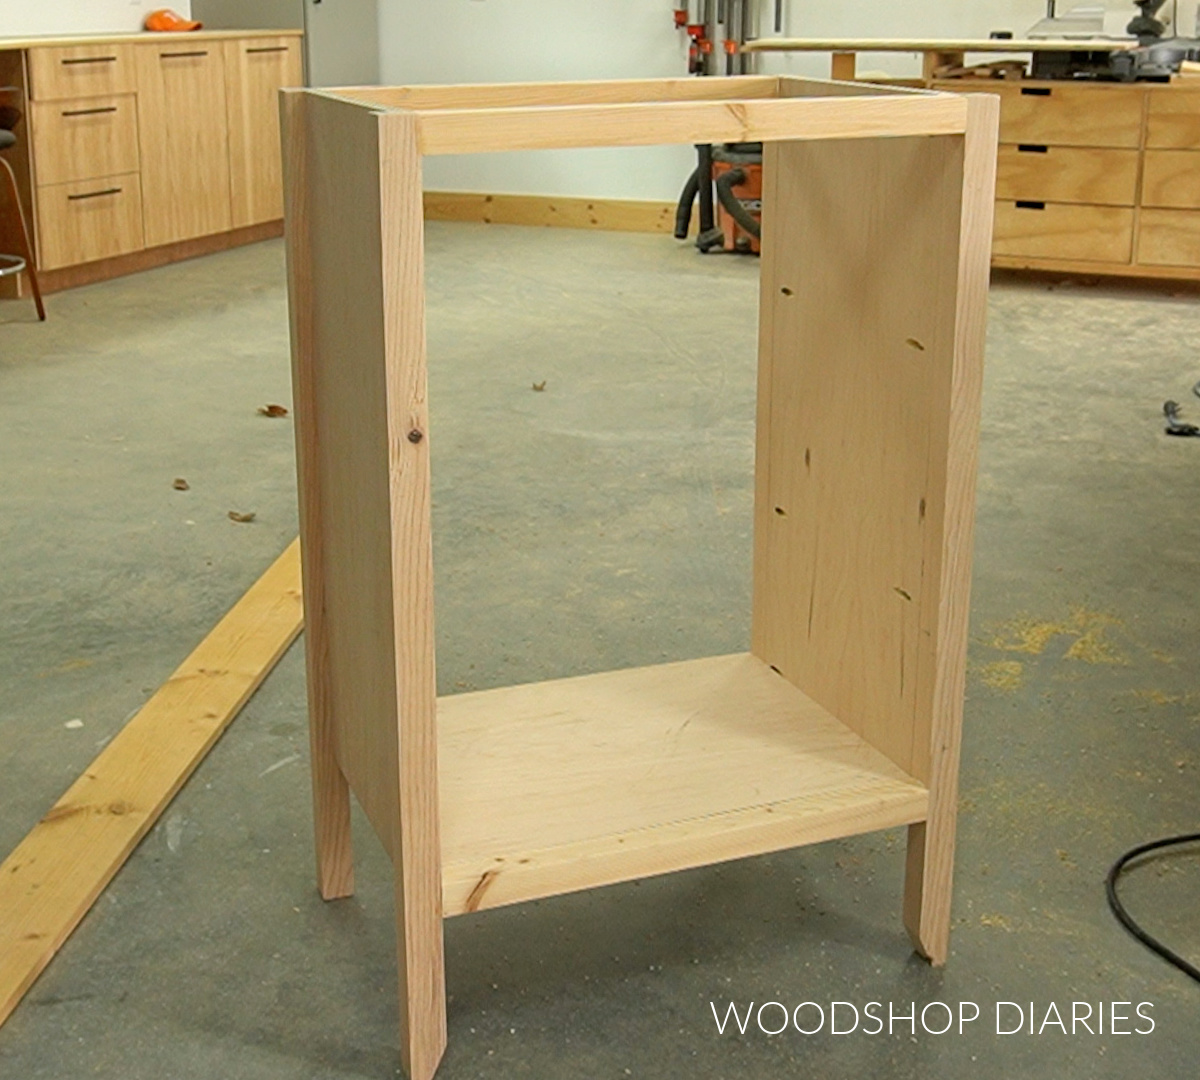 Main body of accent cabinet assembled using pocket holes